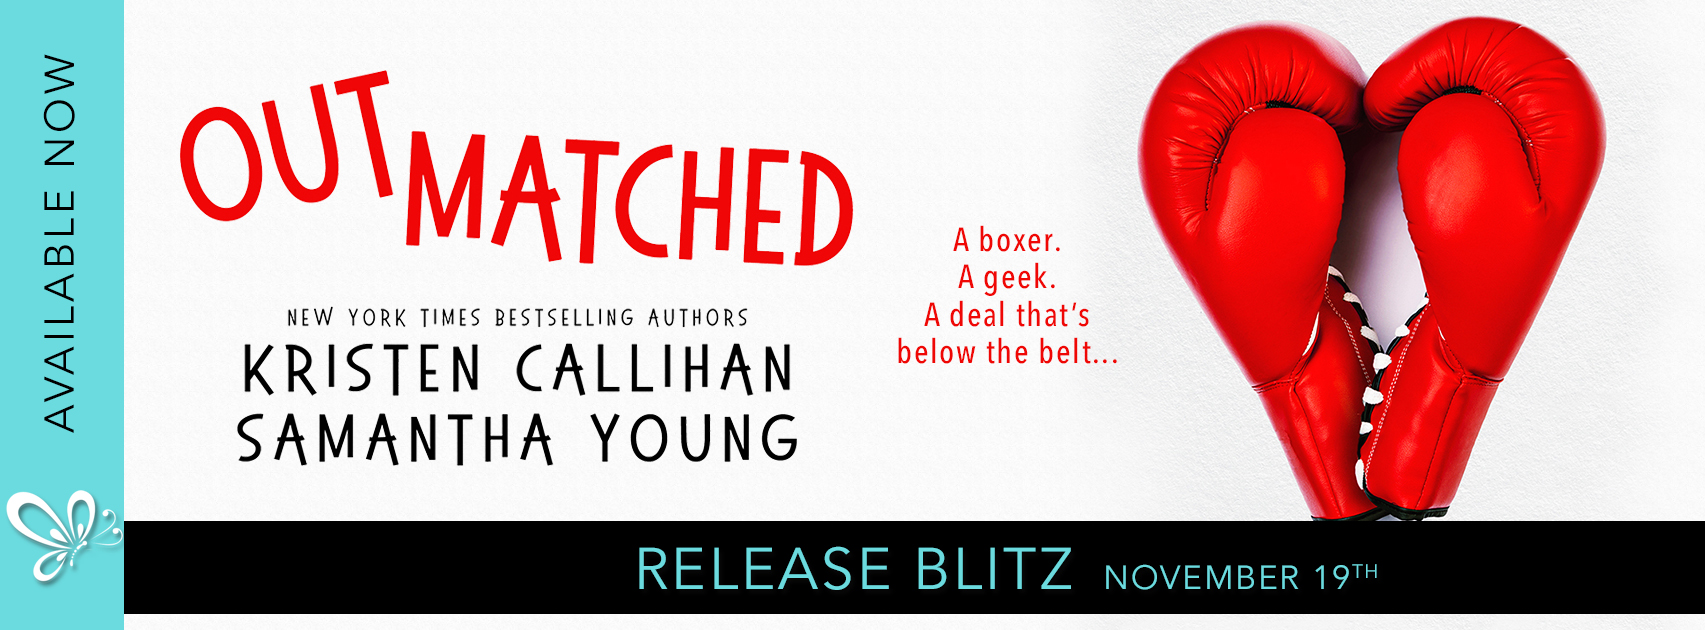 Release Blitz: Outmatched by Kristen Callihan & Samantha Young